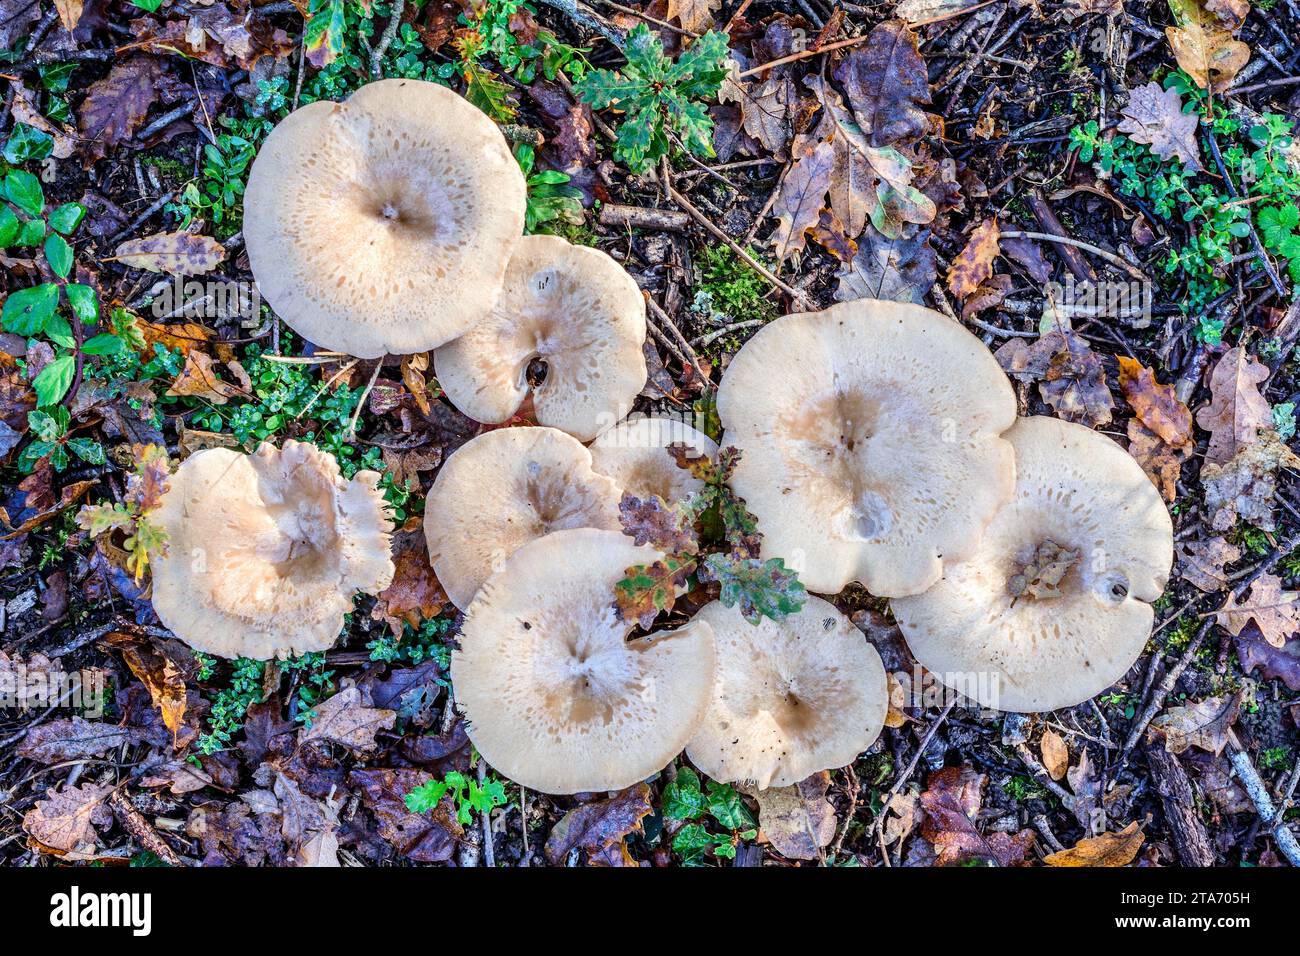 Inedible (Death Cap / Amanita ?) mushrooms with Oak leaves, growing on floor of mixed woodland - central France. Stock Photo